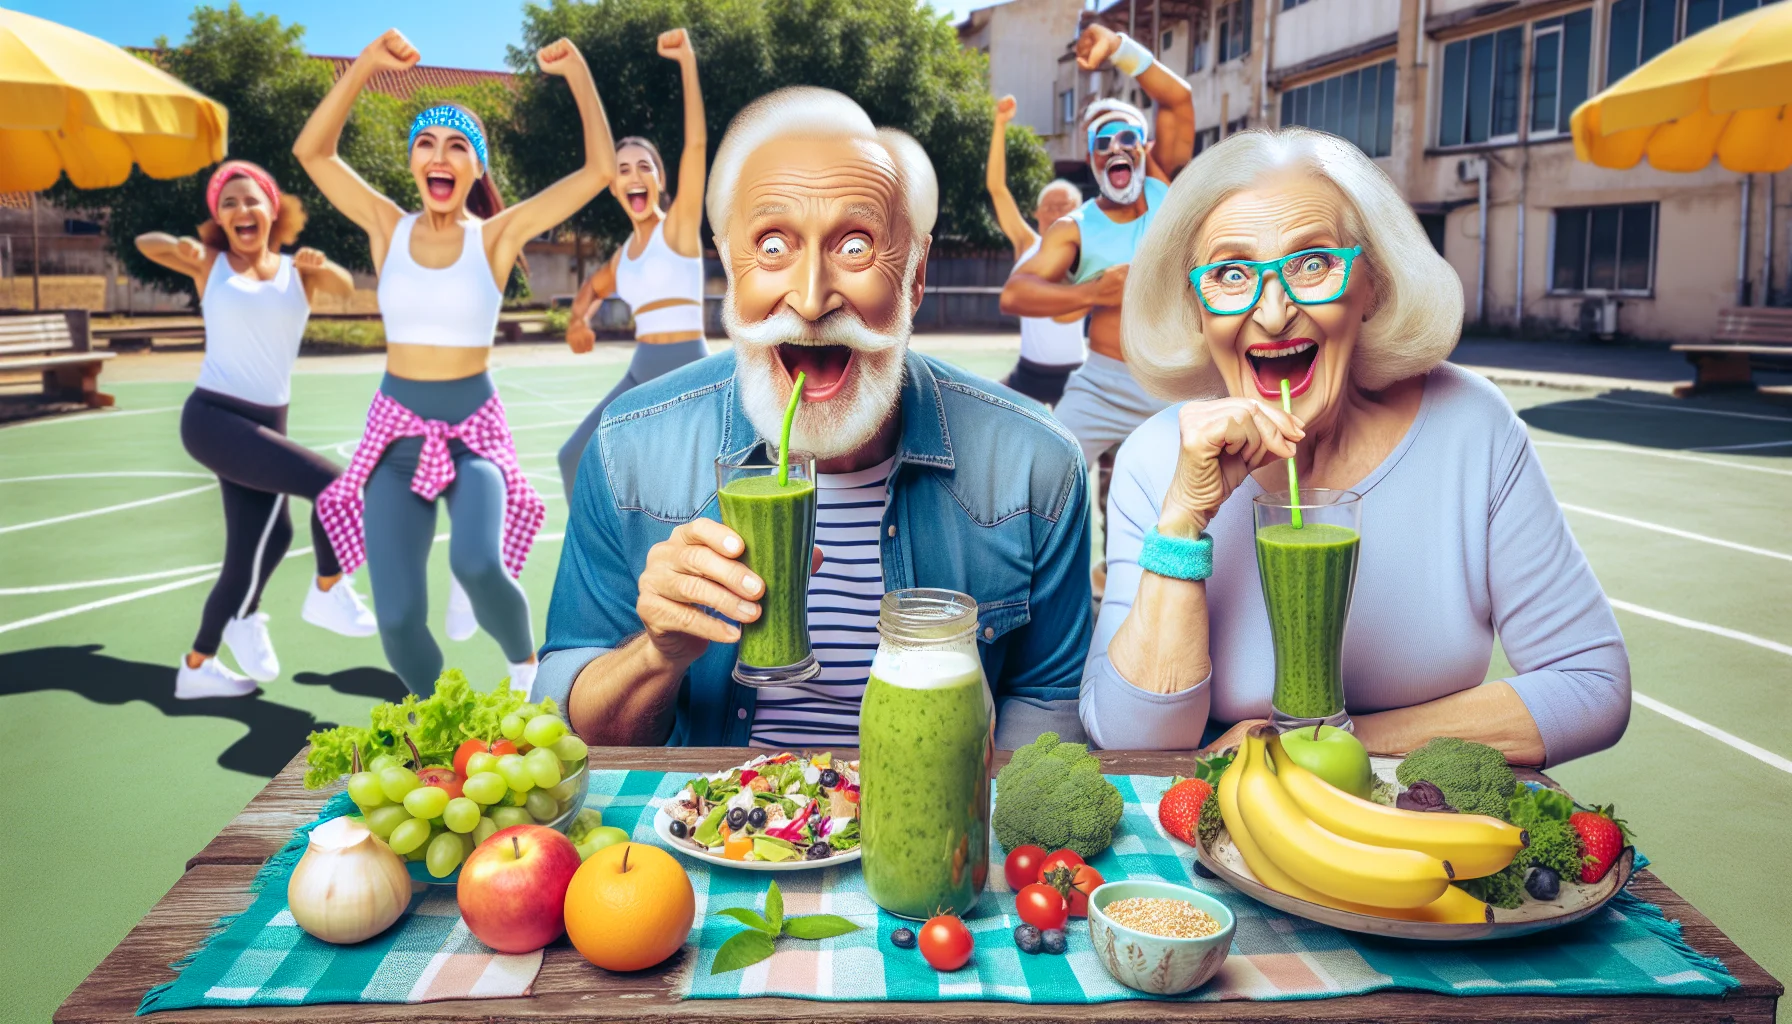 Create a humorously realistic image which showcases an energetic scene among elderly individuals. In this scene, a Caucasian male and a Hispanic female, who appear to be in their 70s, are sipping on green smoothies, their faces lighting up with newfound vitality. Their table is laden with various healthy foods like fruits, salads, and whole grains. In the background, a Middle-Eastern fitness instructor is leading a high-energy Zumba class of other energetic seniors, clearly amused. The overall scene is set in a sunny outdoor park, with blue skies enhancing the vibrant, energetic atmosphere.